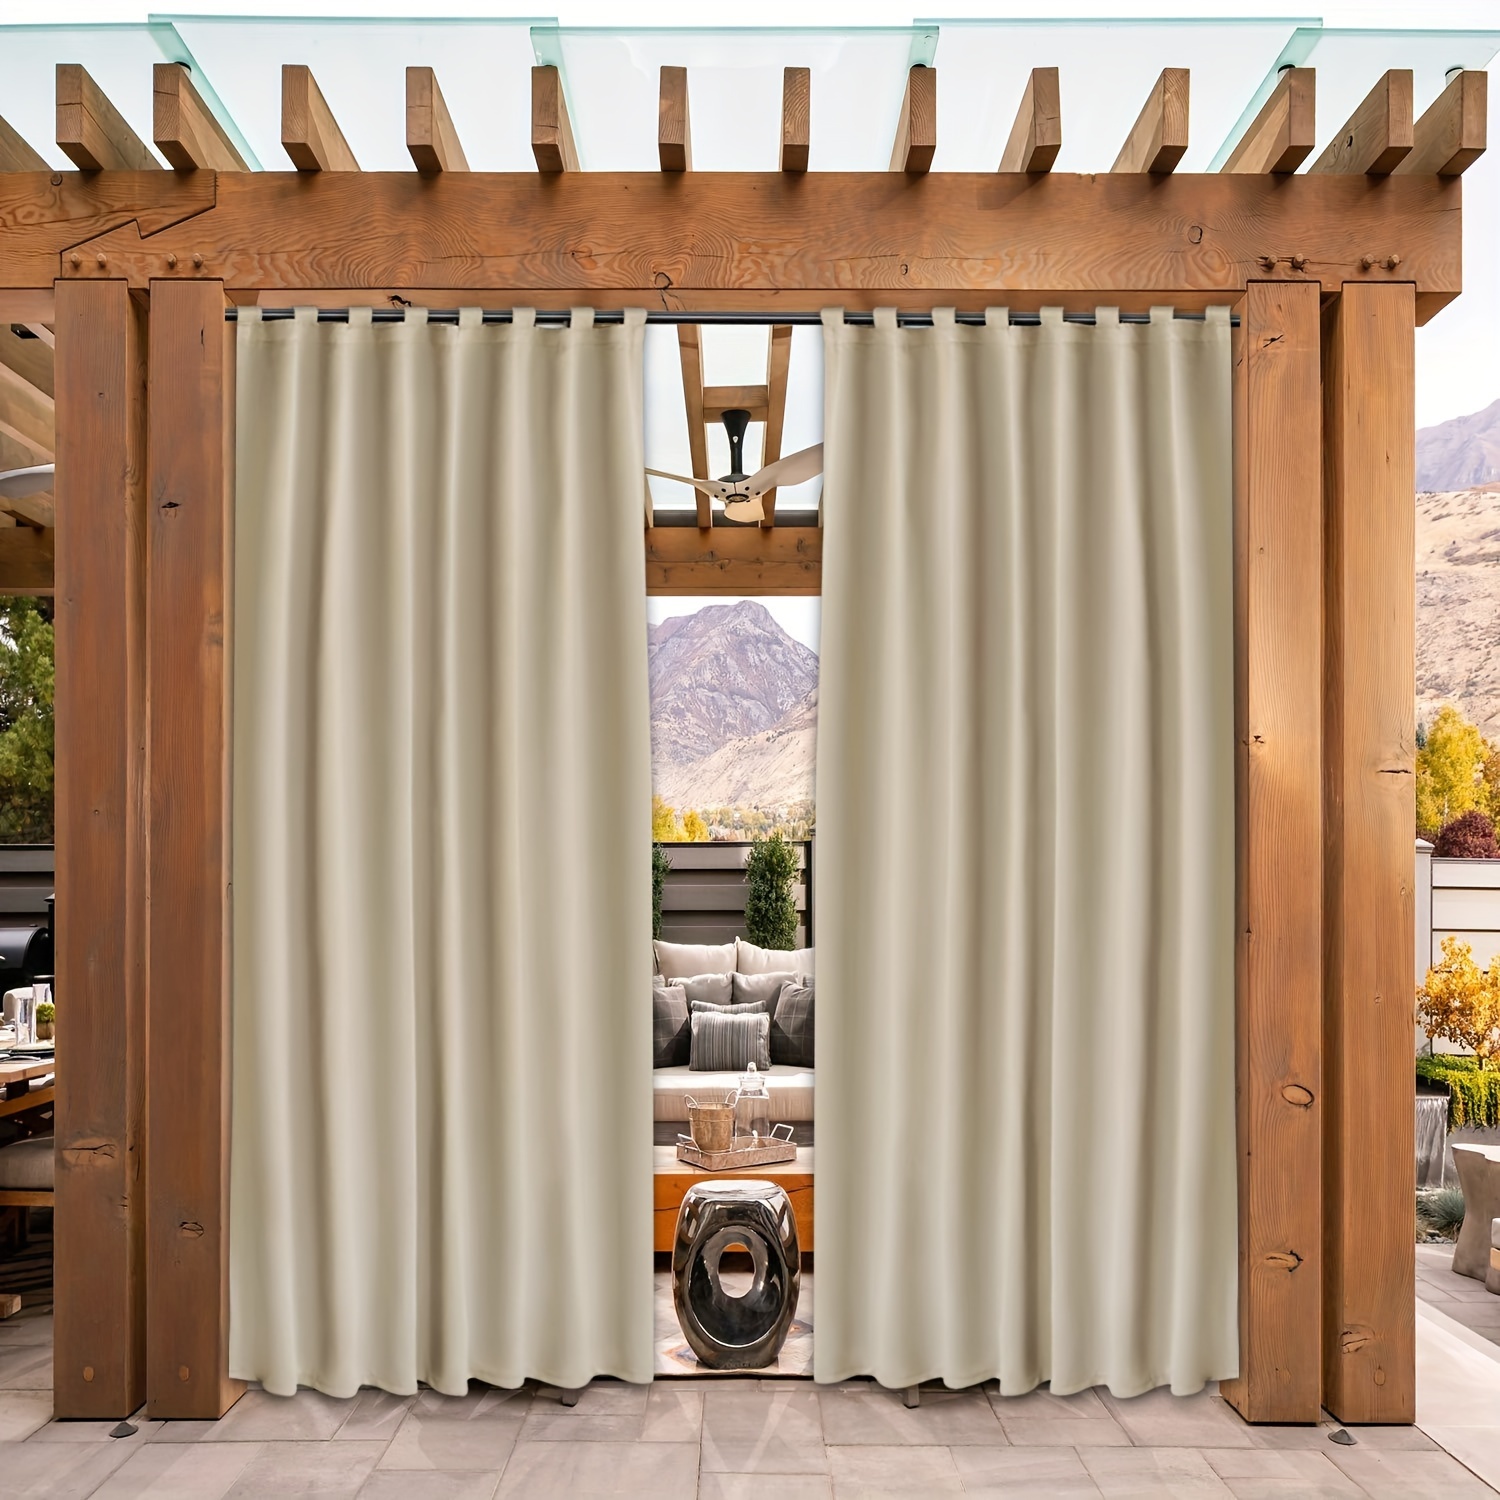 

2pcs Outdoor Waterproof Curtains For Patio Porch Gazebo, Thermal Insulated Sun Blocking Drapes For Bedroom Living Room, Contemporary Style, Various Sizes